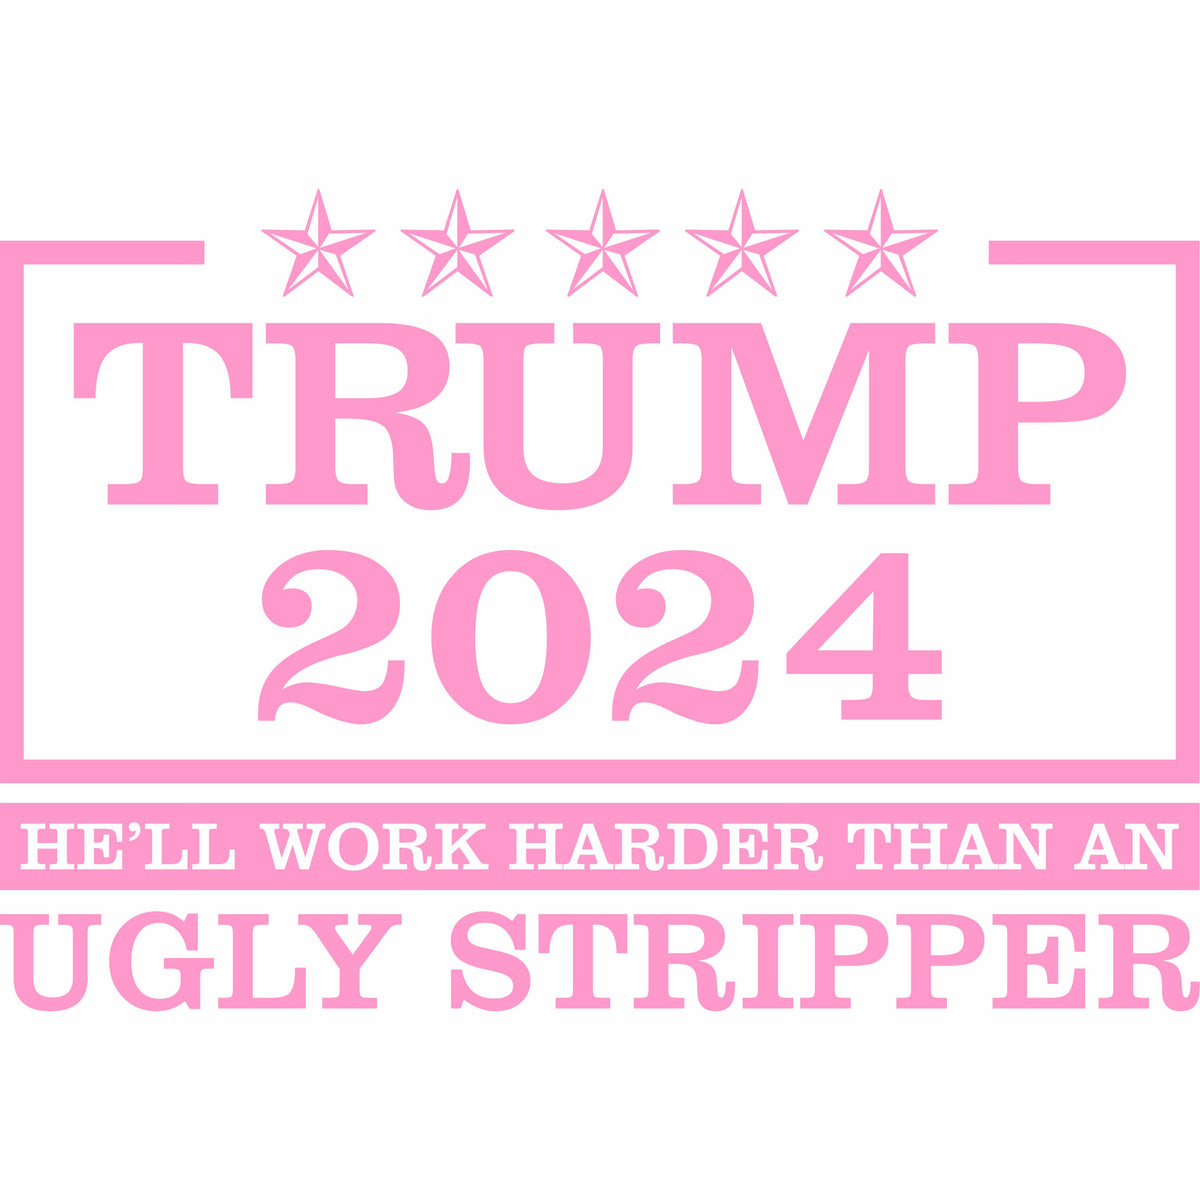 Trump 2024 - He'll Work Harder Than An Ugly Stripper - Vinyl Decal - Free Shipping